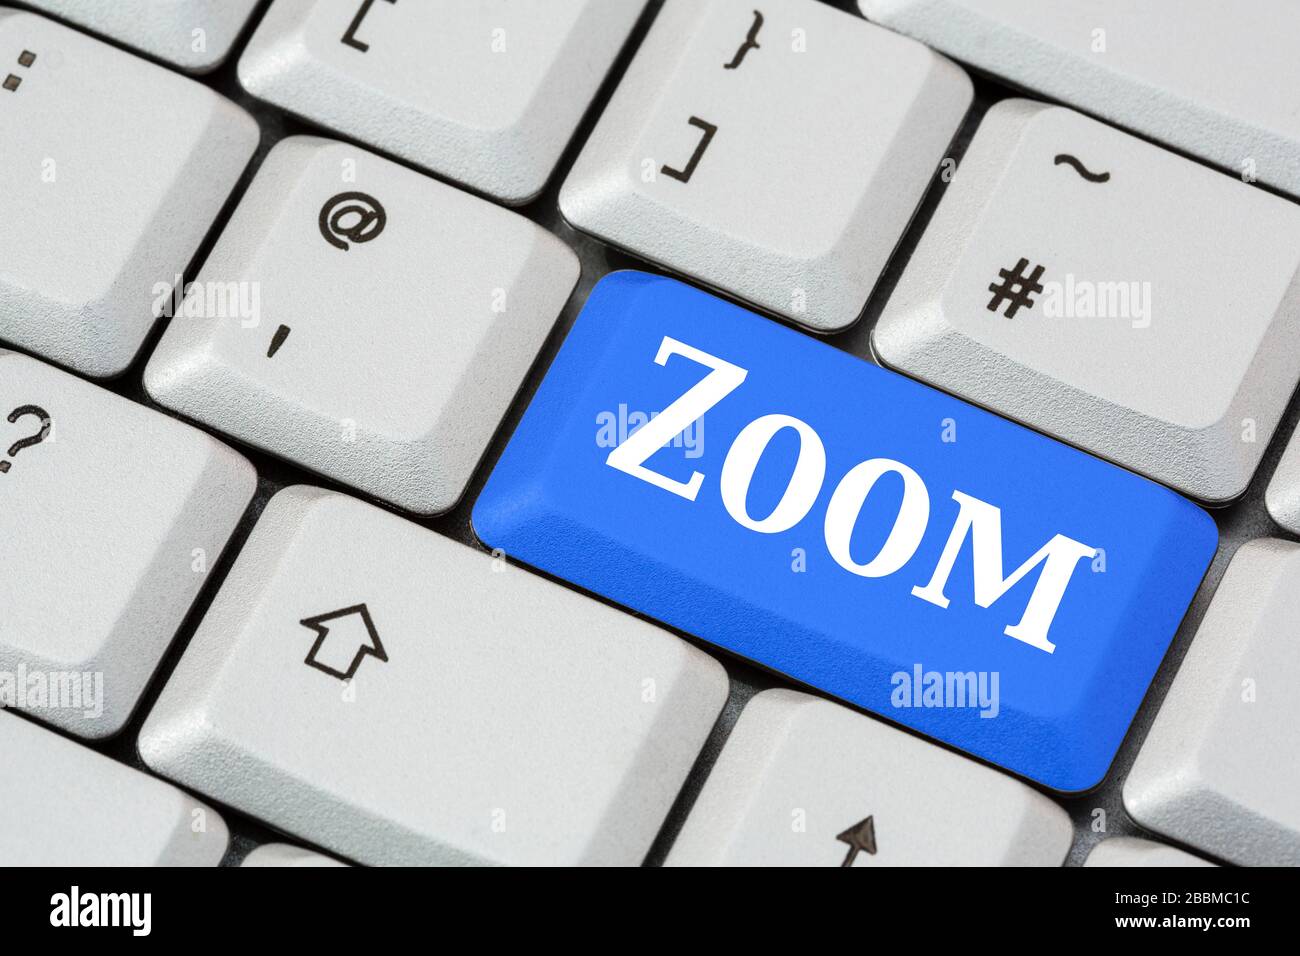 A keyboard with Zoom in white lettering on a blue enter key. Zoom app for video call conferencing concept. England, UK, Britain Stock Photo